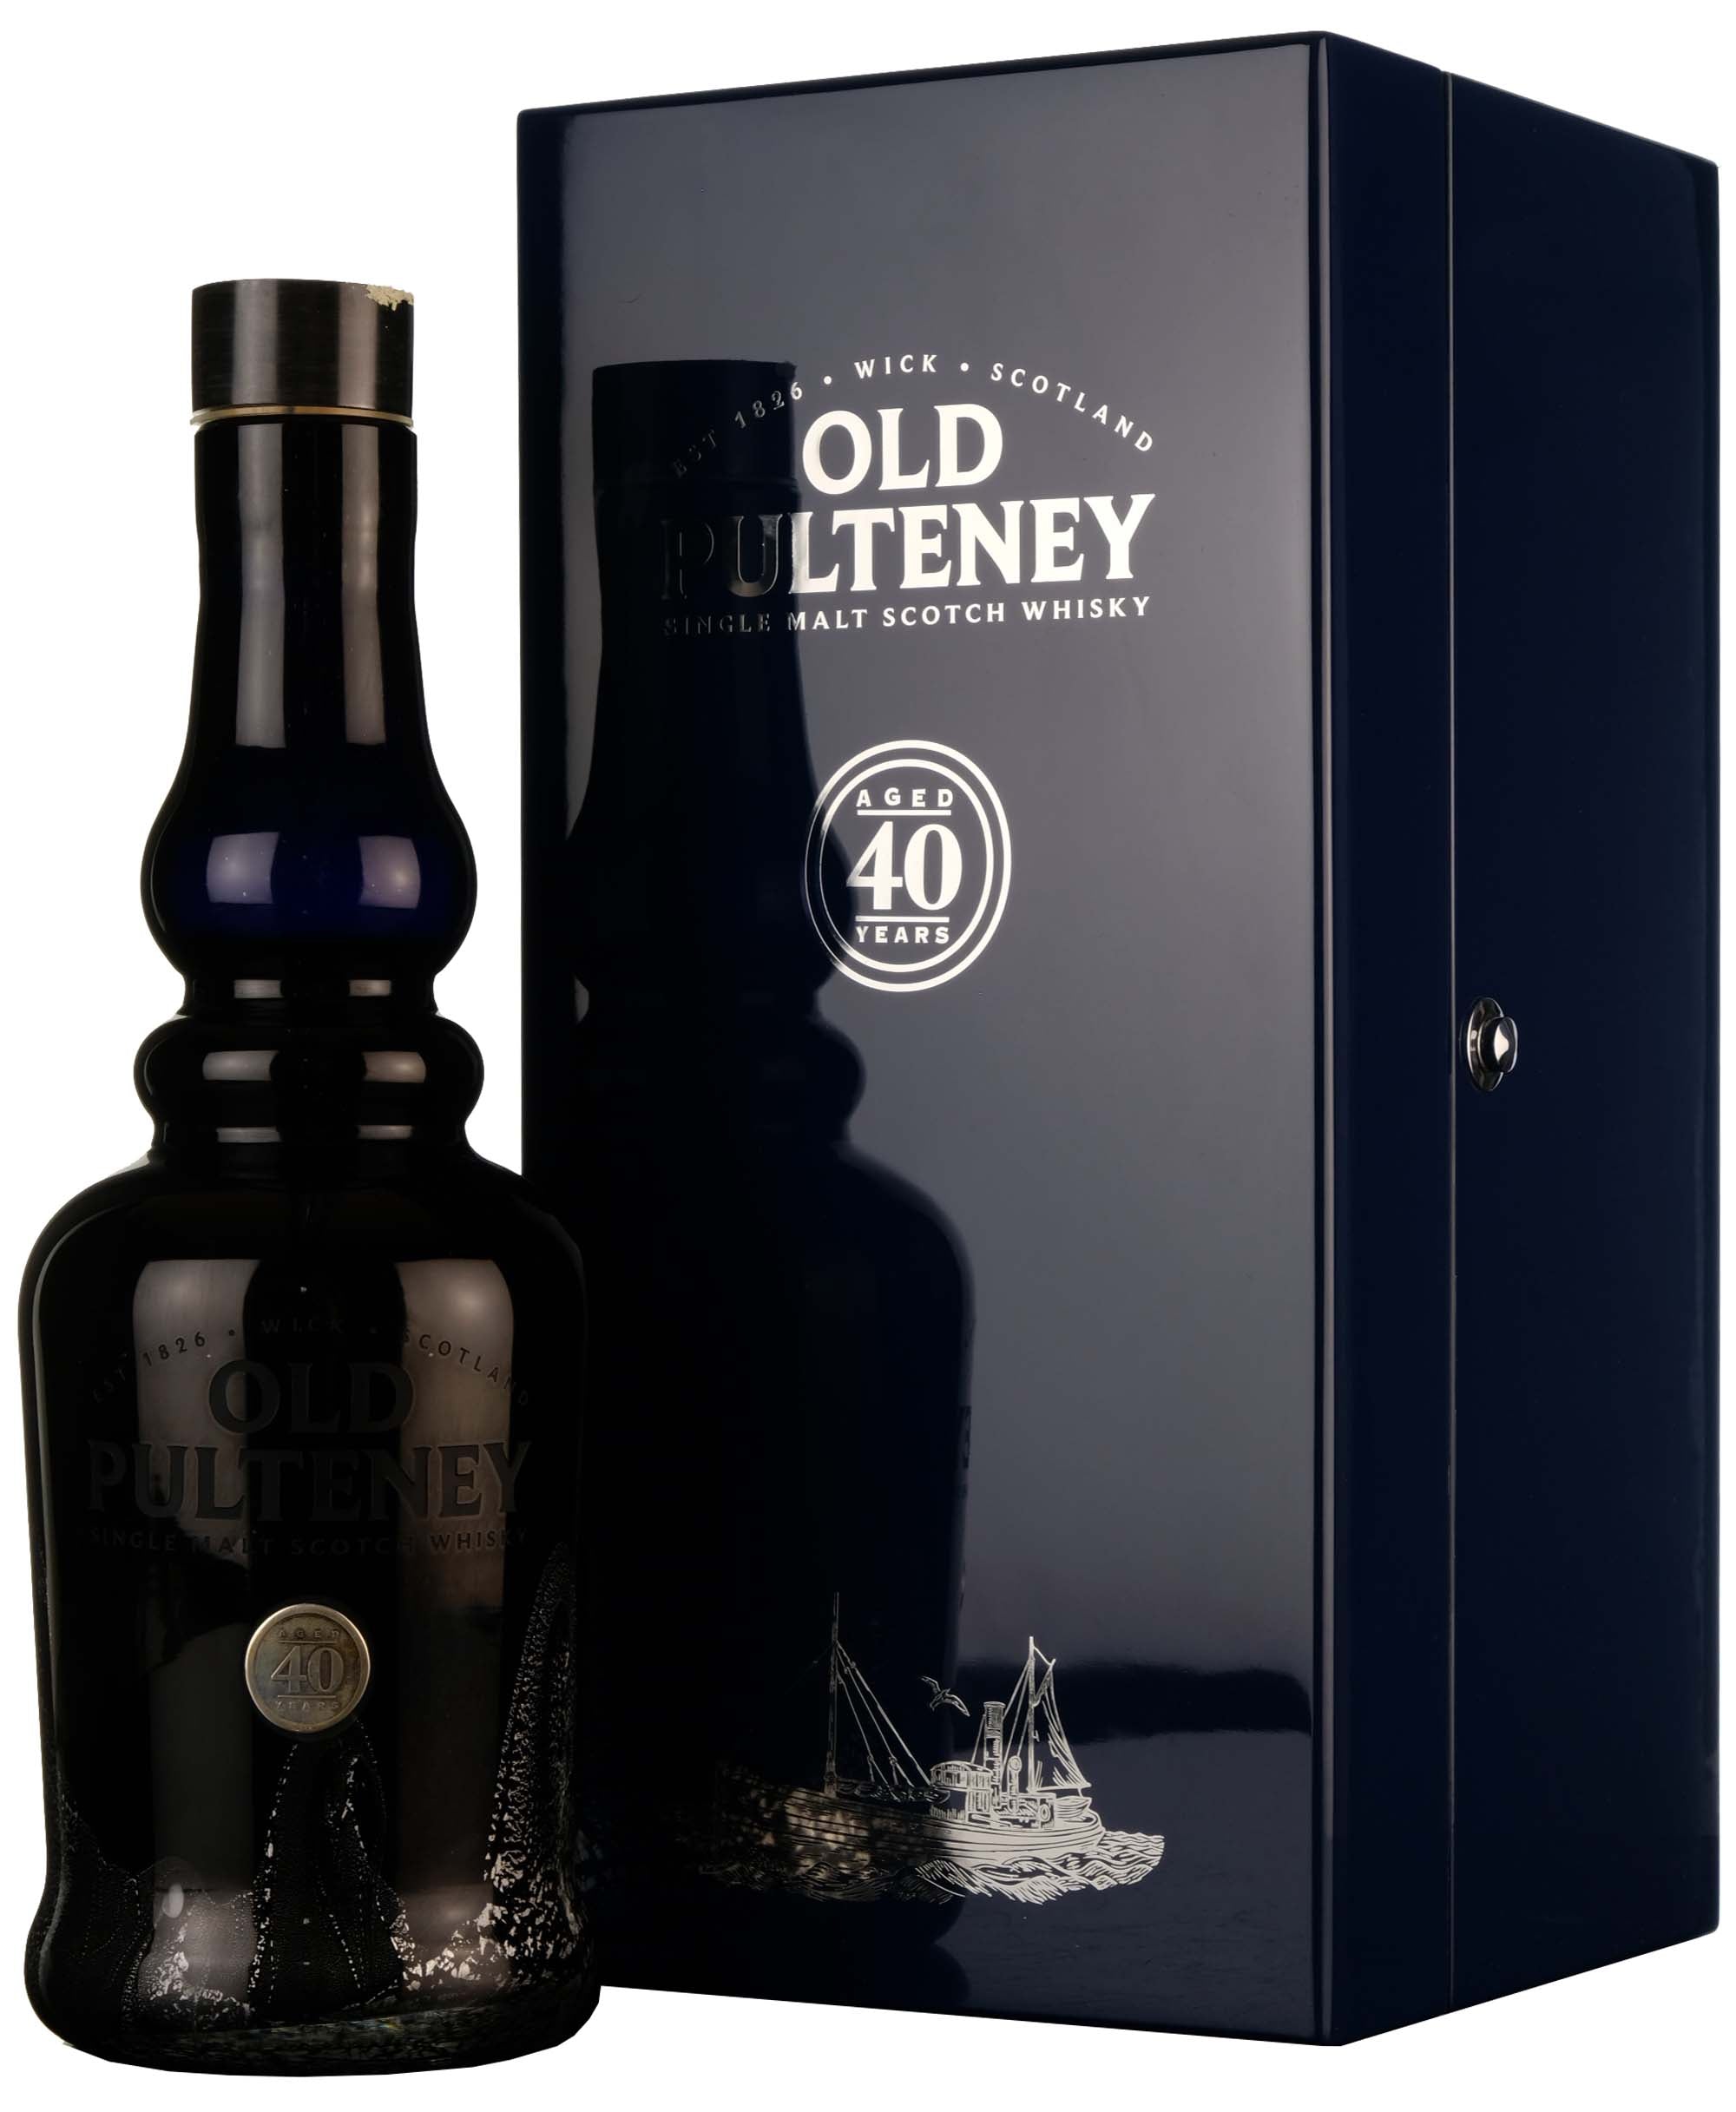 Old Pulteney 40 Year Old Bottled 2012